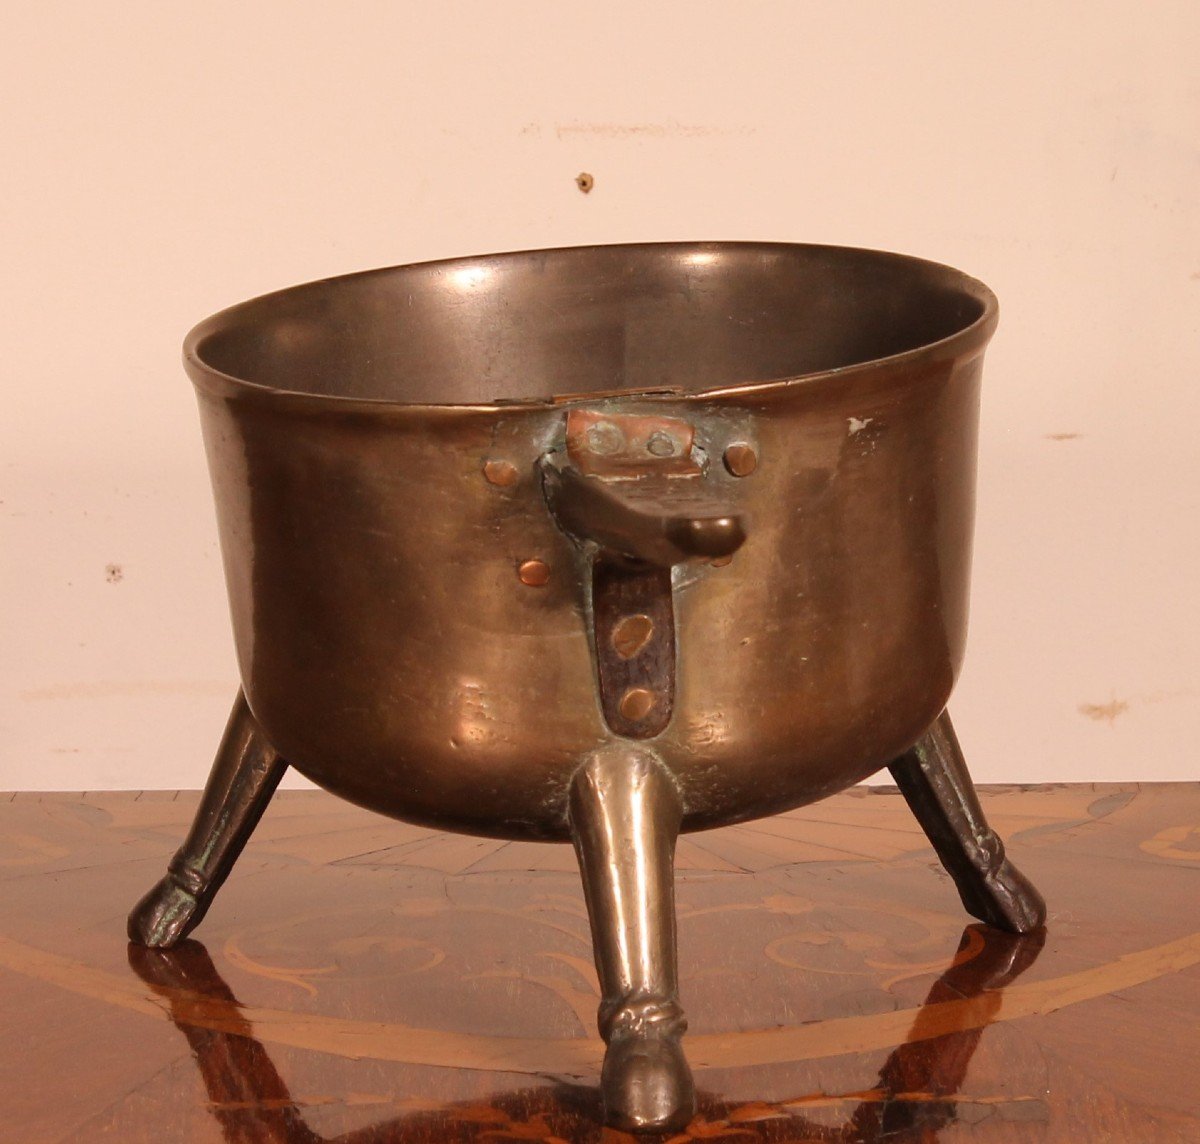 17th Century Tripod Apothecary Skillet Dated 1698 From The Ward Rvmens Family-photo-1